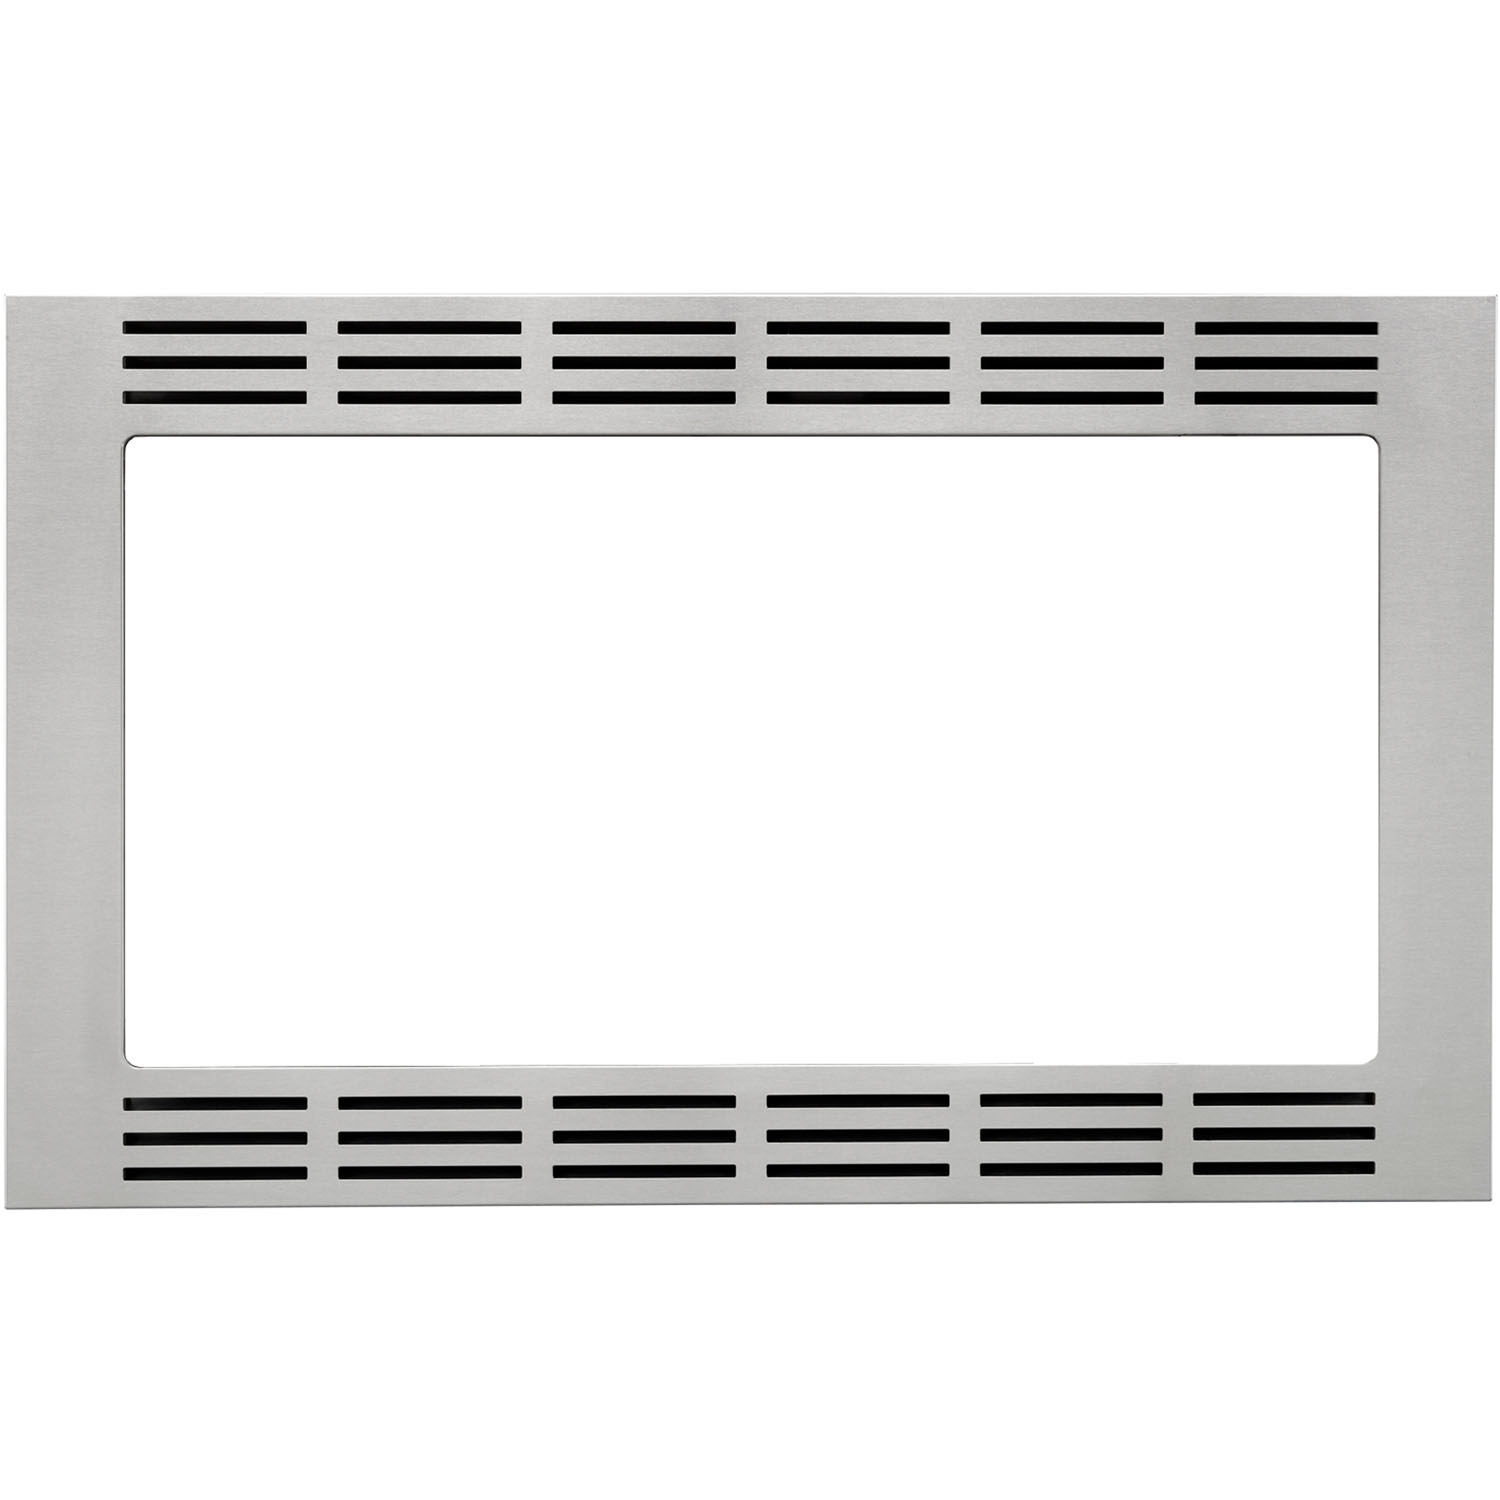 27" Trim Kit for 1.6 cuft Stainless Microwave Ovens, NN-TK722SS